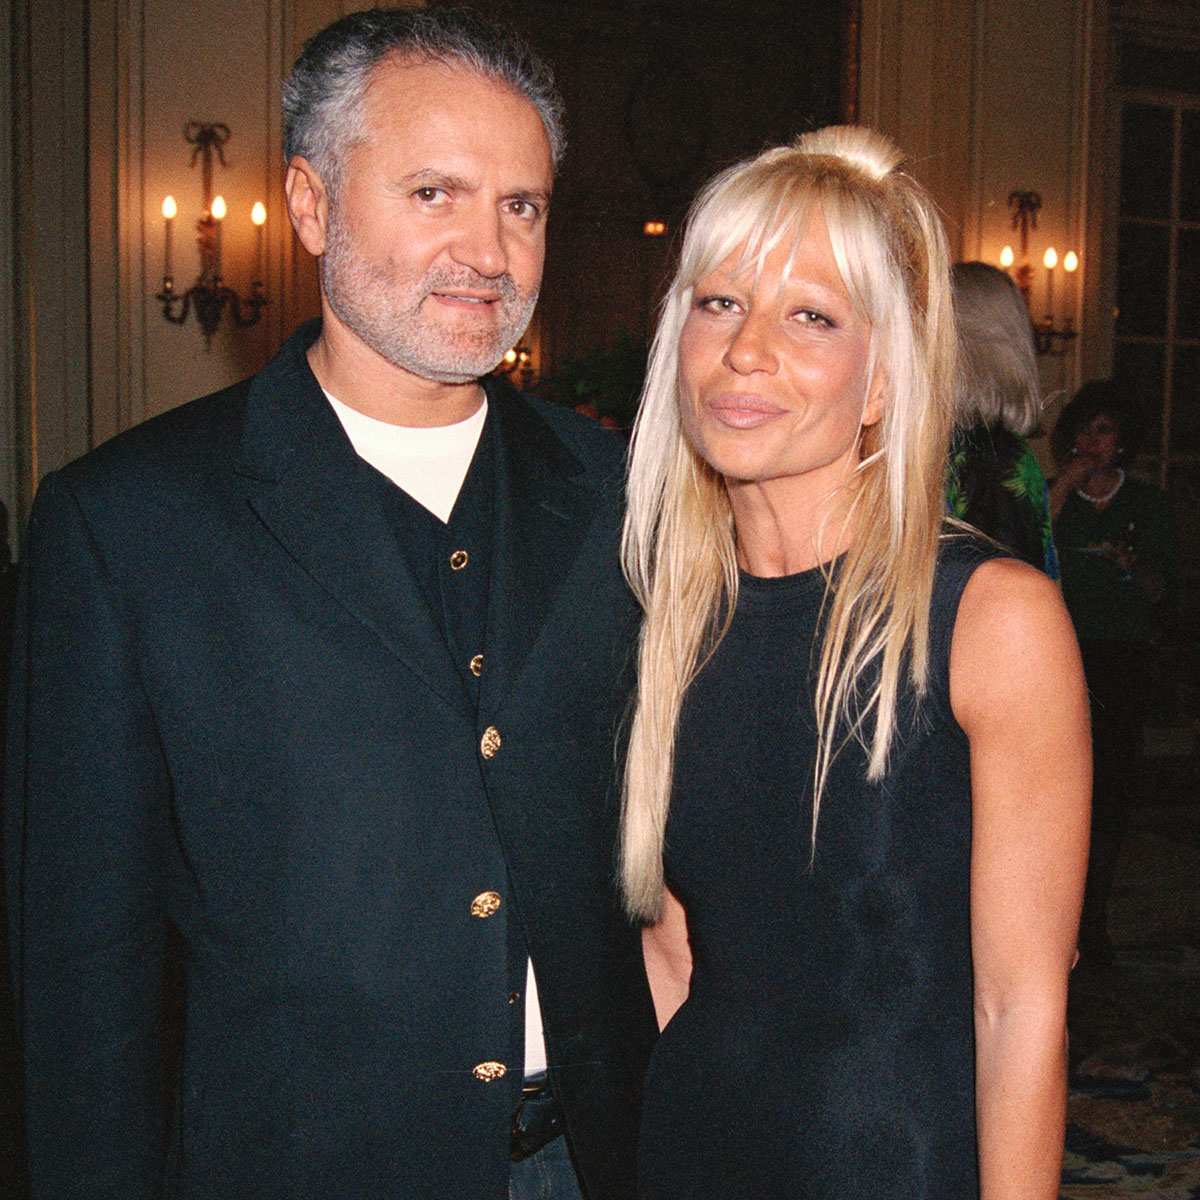 DV TV: A Date with Donatella Versace, the Social Series